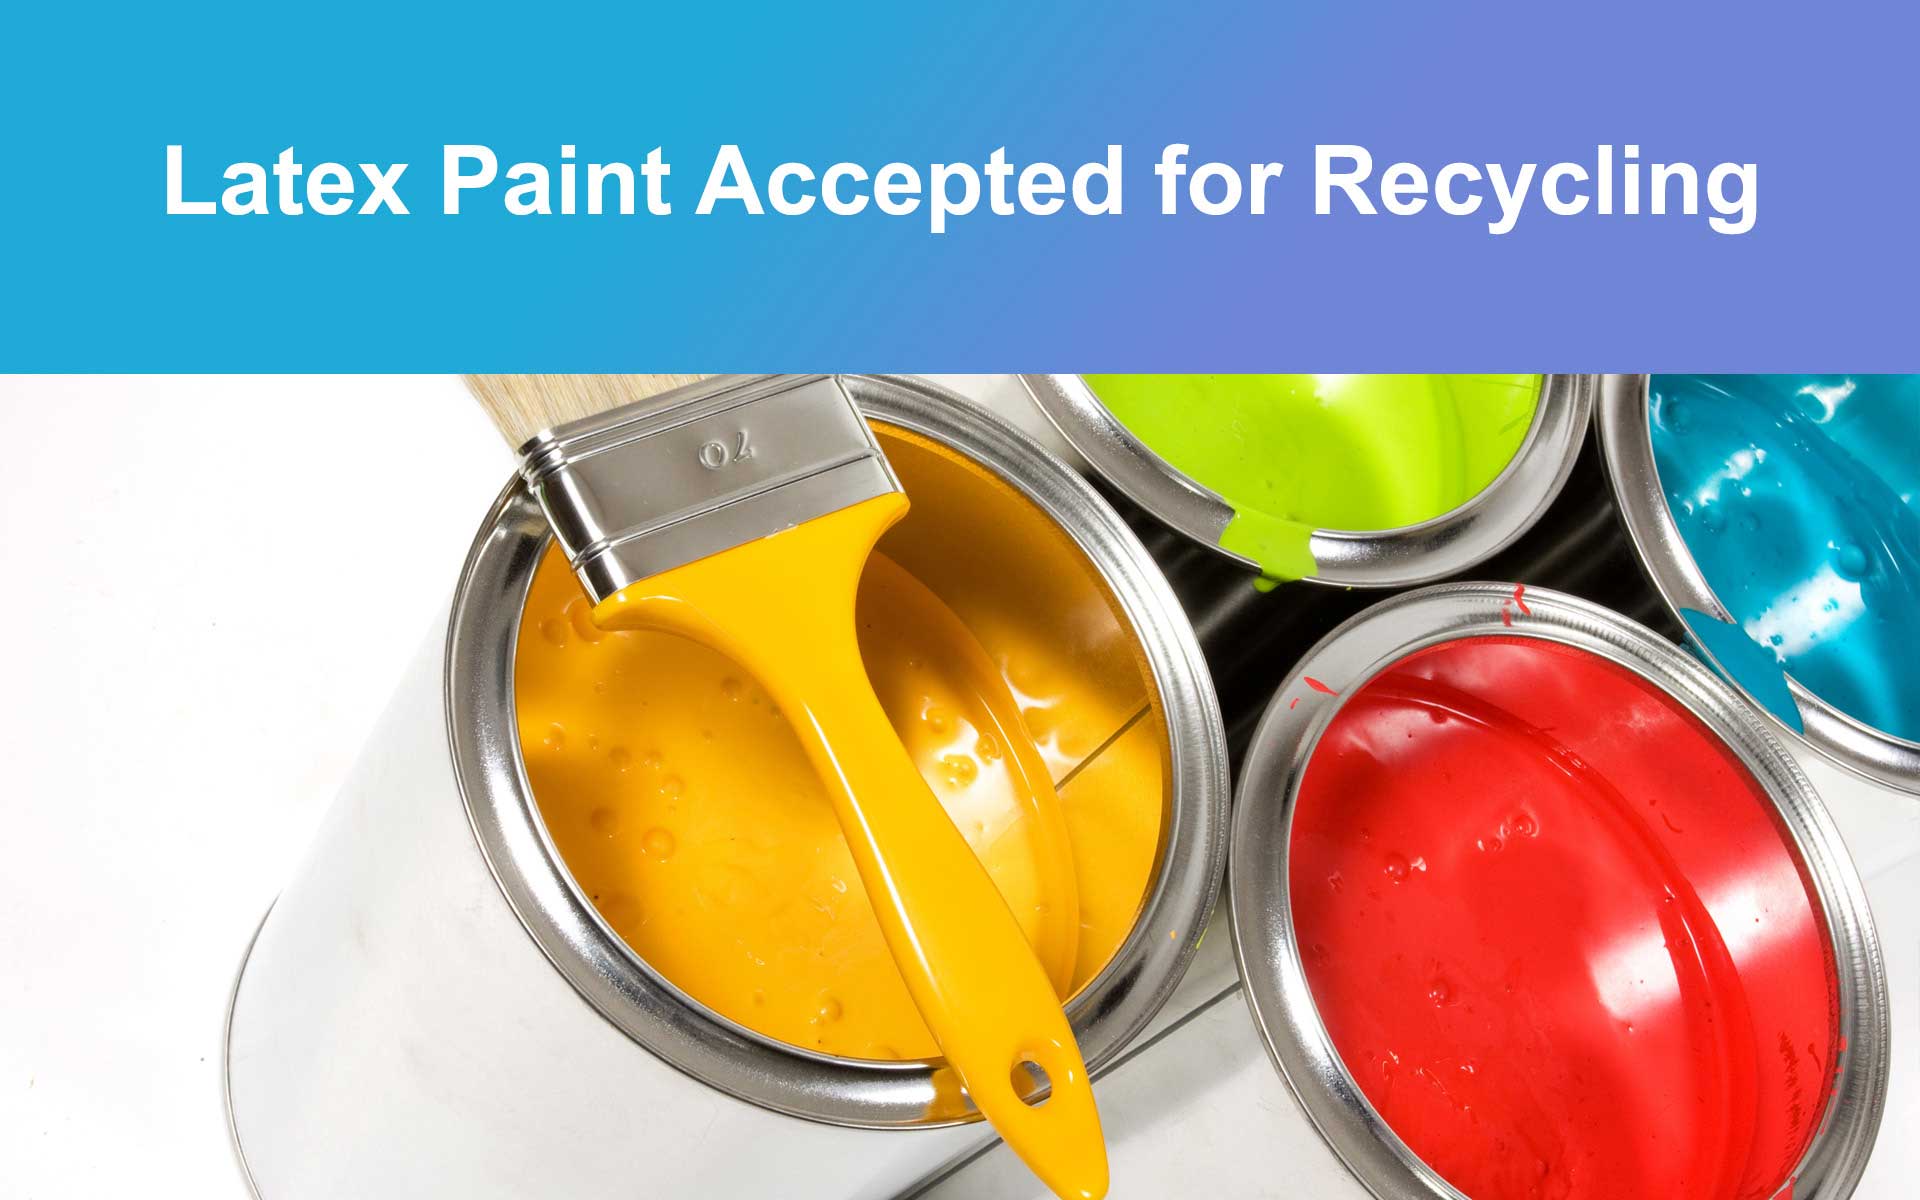 Latex Paint Accepted for Recycling - City of Spokane, Washington